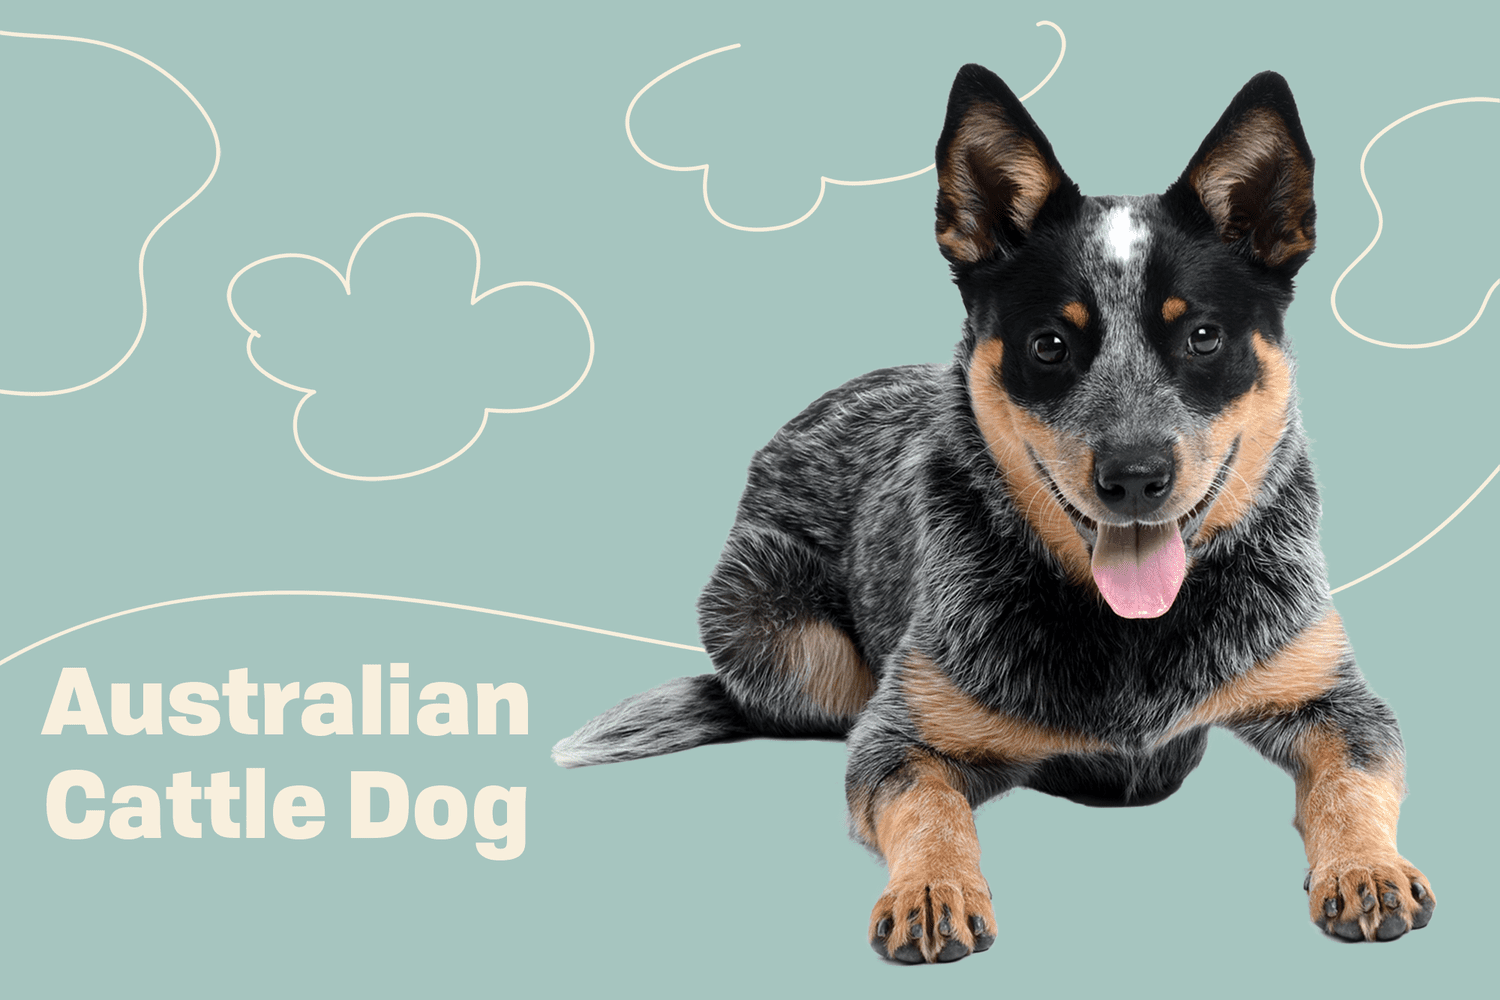 Australian Cattle Dog Breed Information & Characteristics | Daily Paws